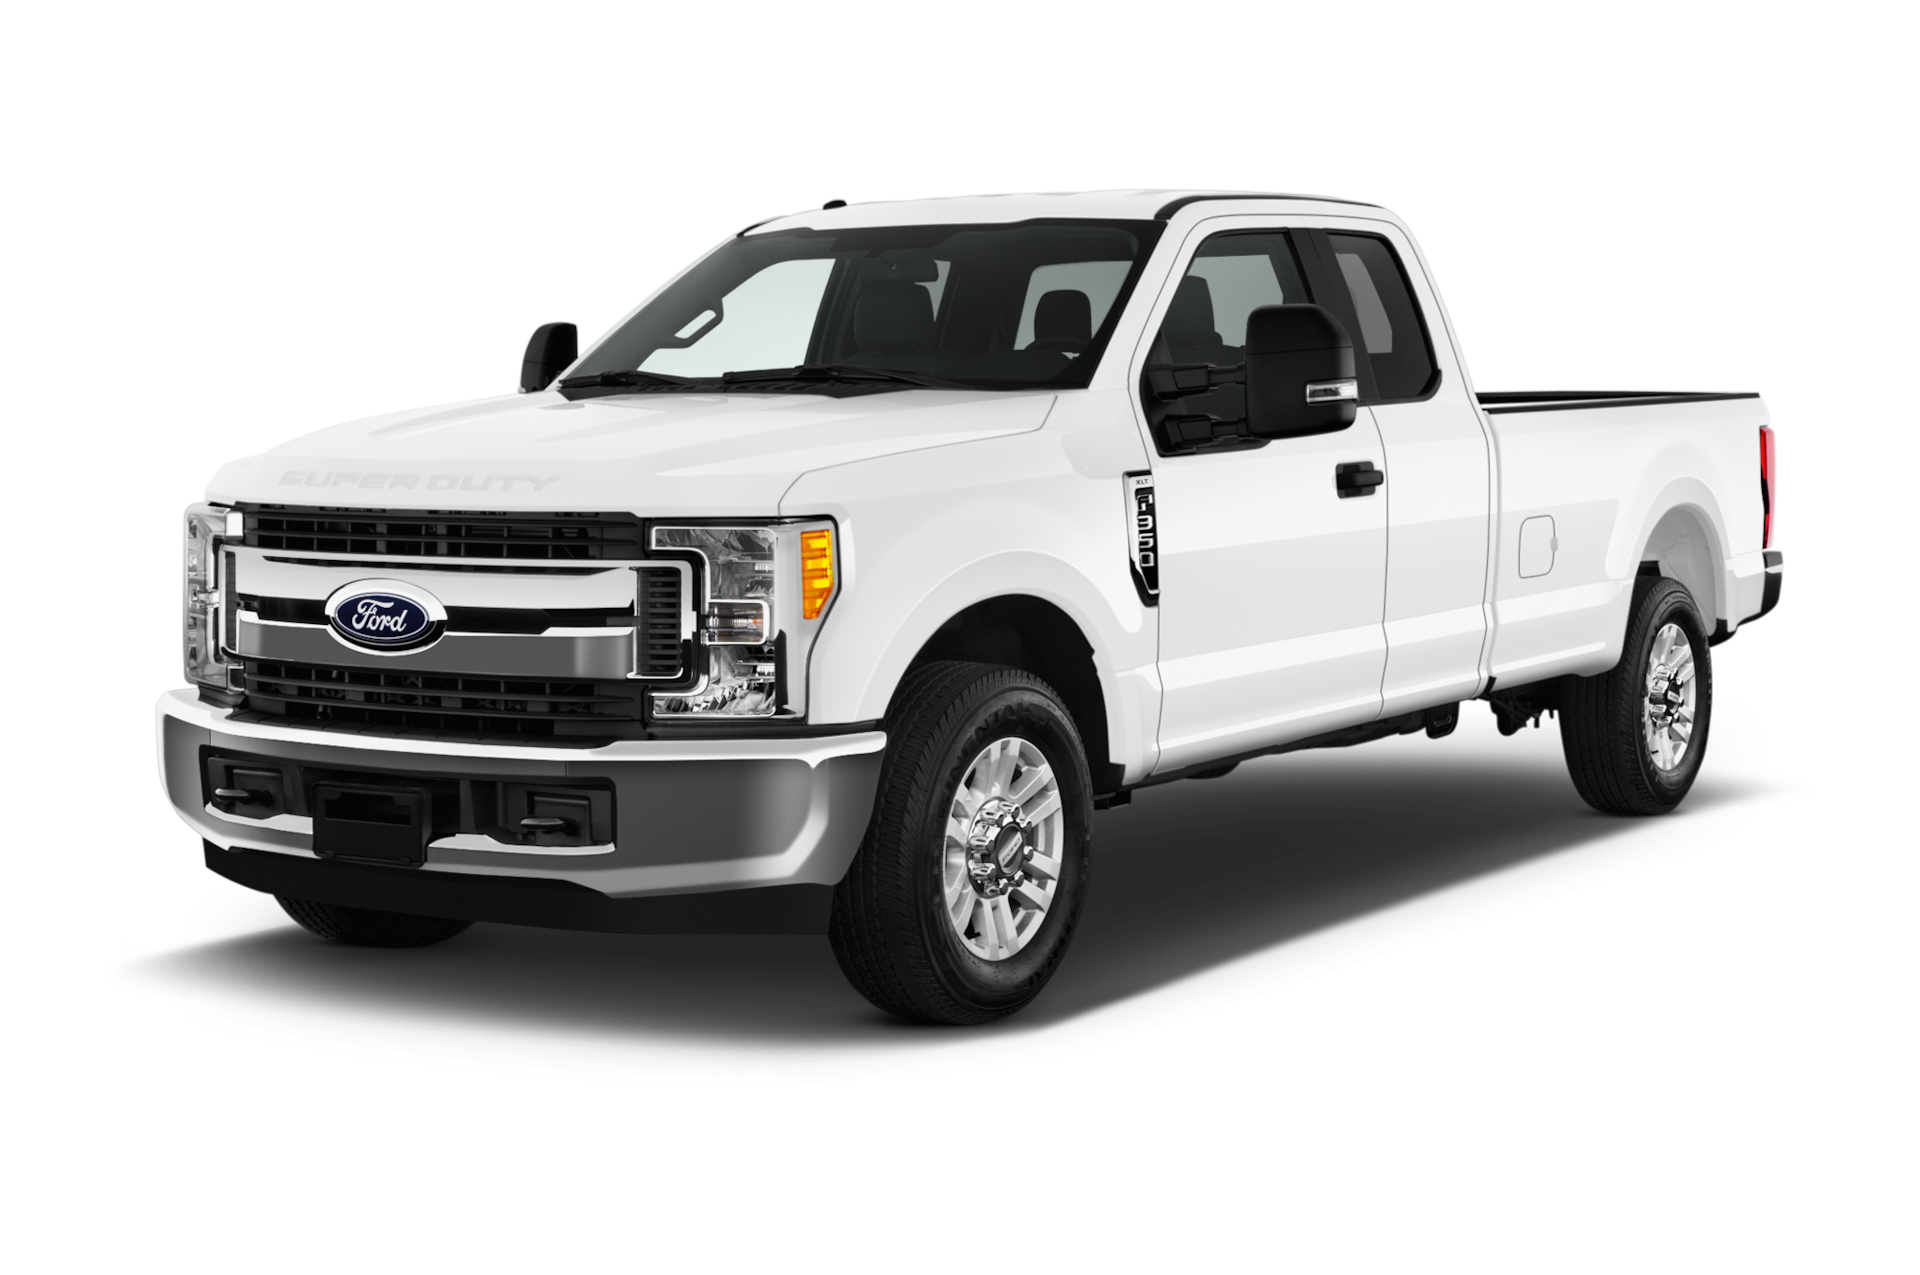 2017 Ford F-350 Prices, Reviews, and Photos - MotorTrend